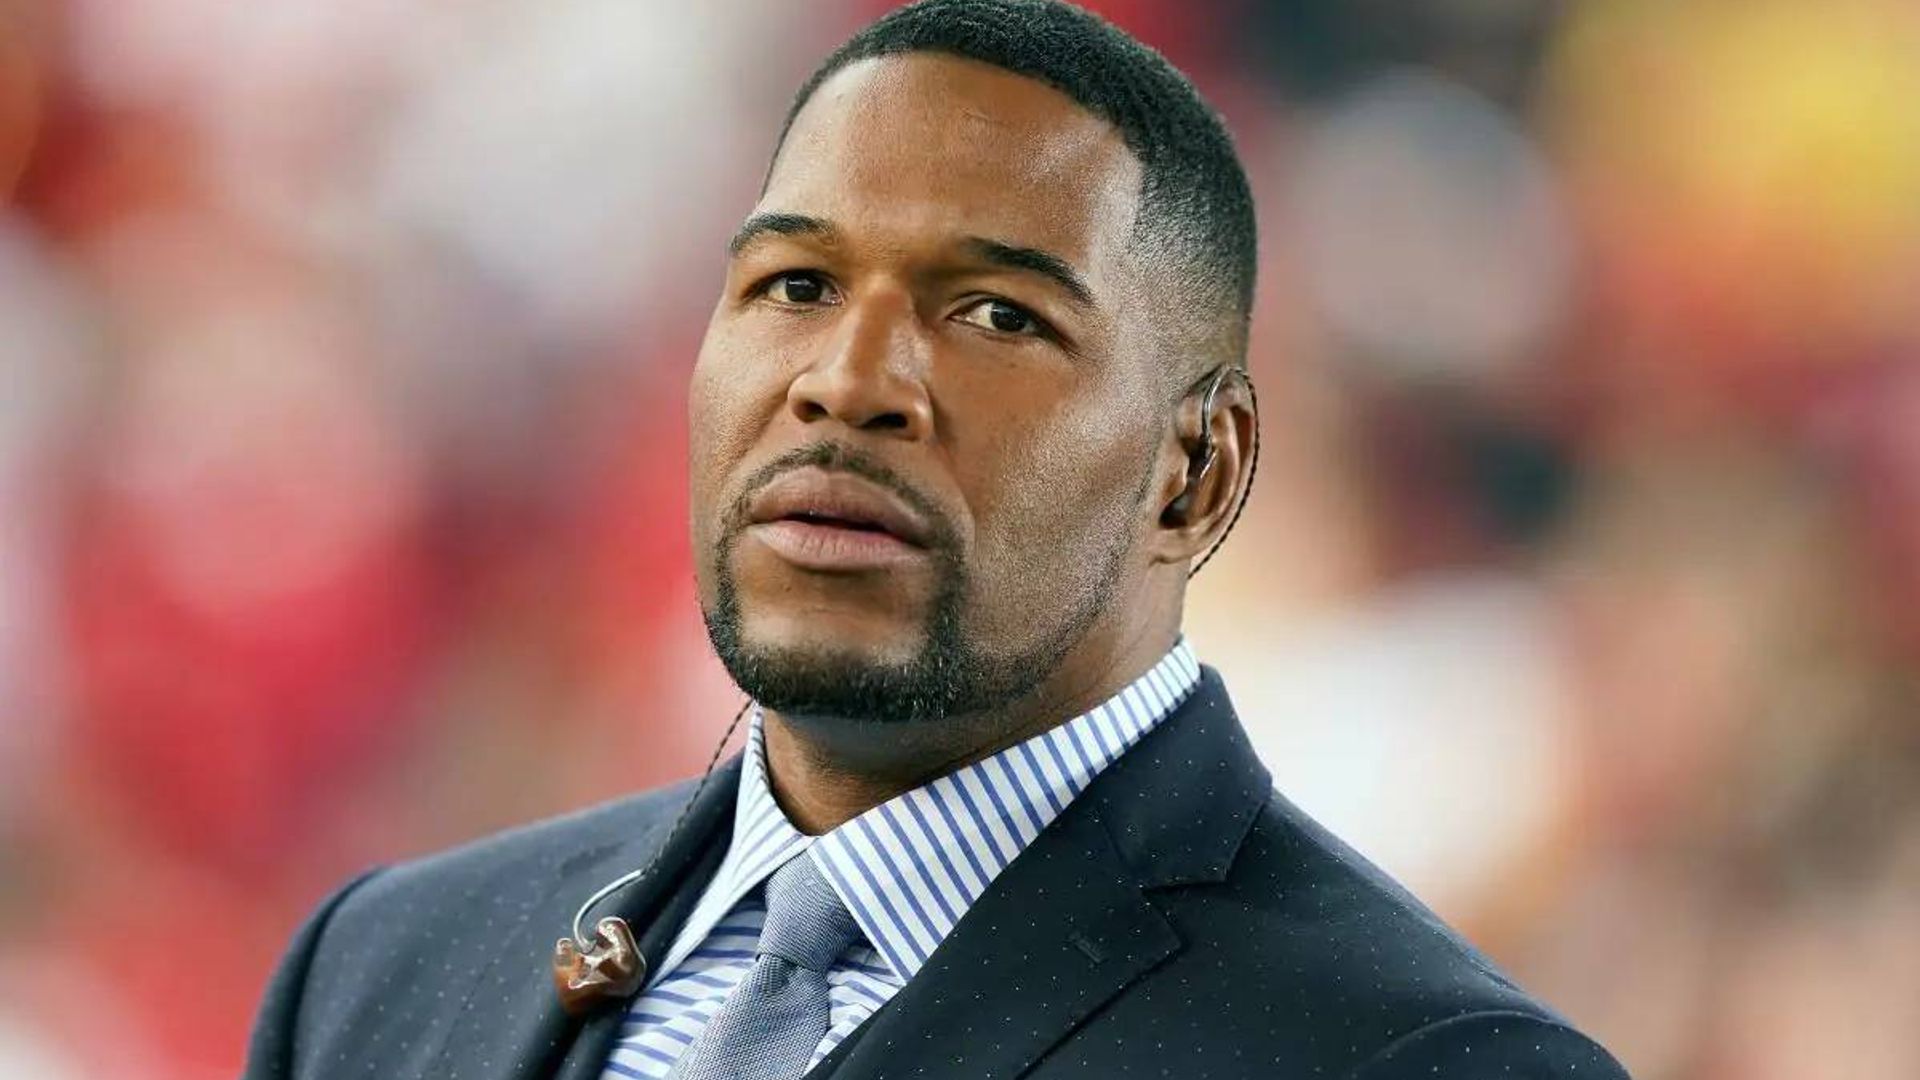 Michael Strahan Goes Public With Very Personal Struggle Away From Gma 